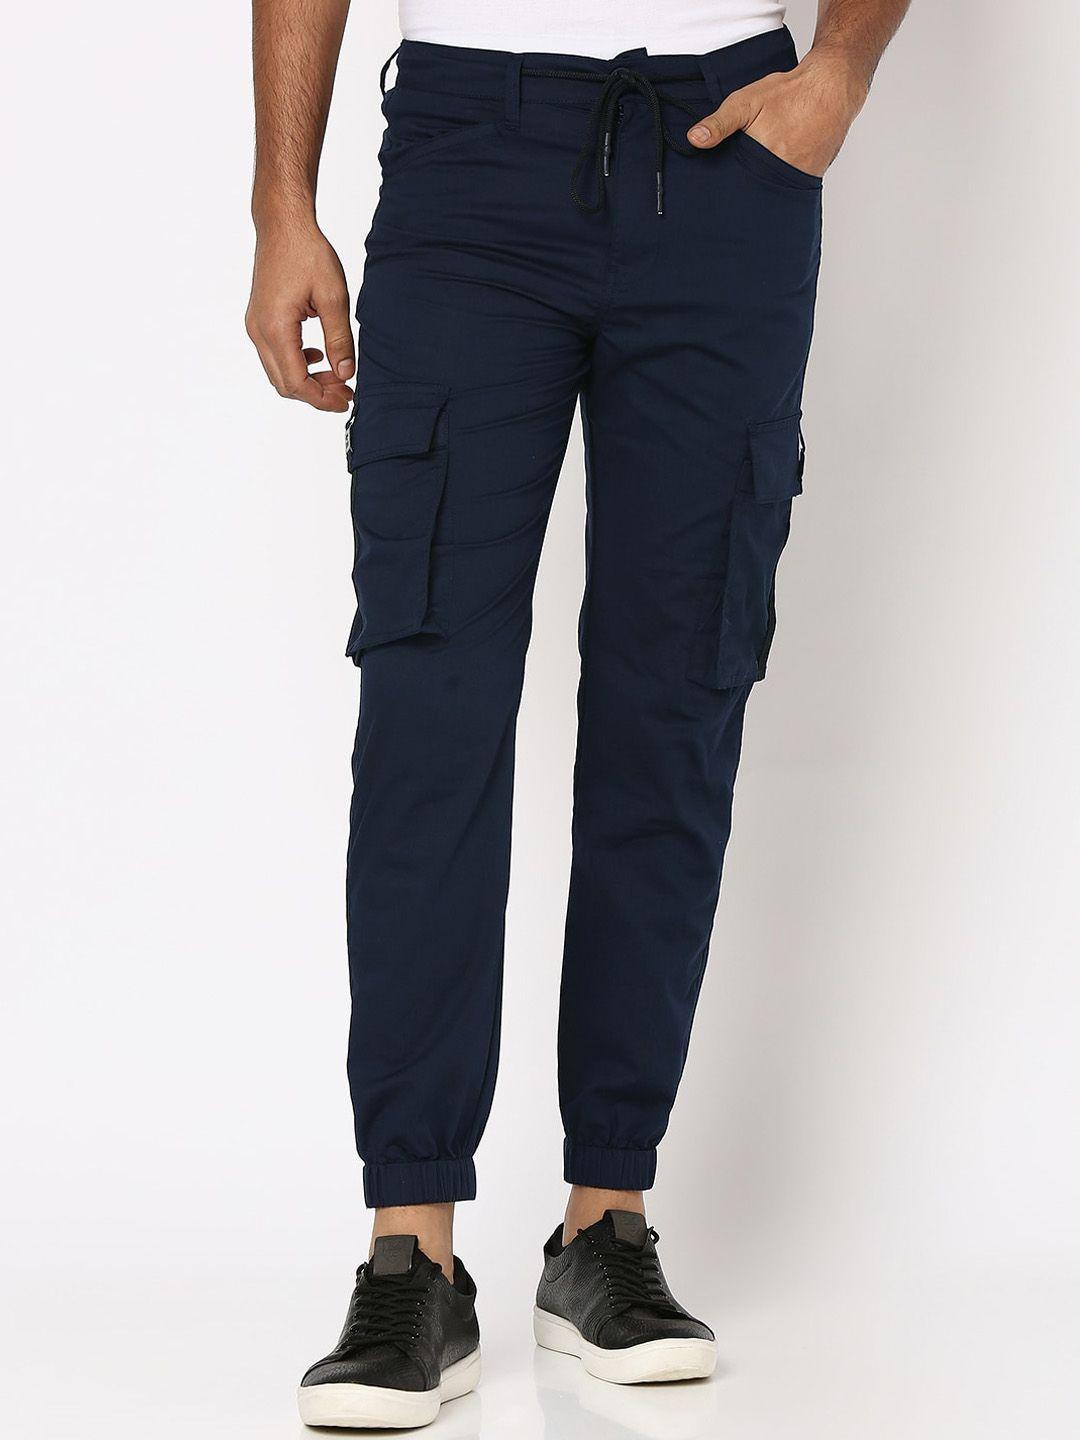 mufti-men-mid-rise-sports-fit-casual-cotton-joggers